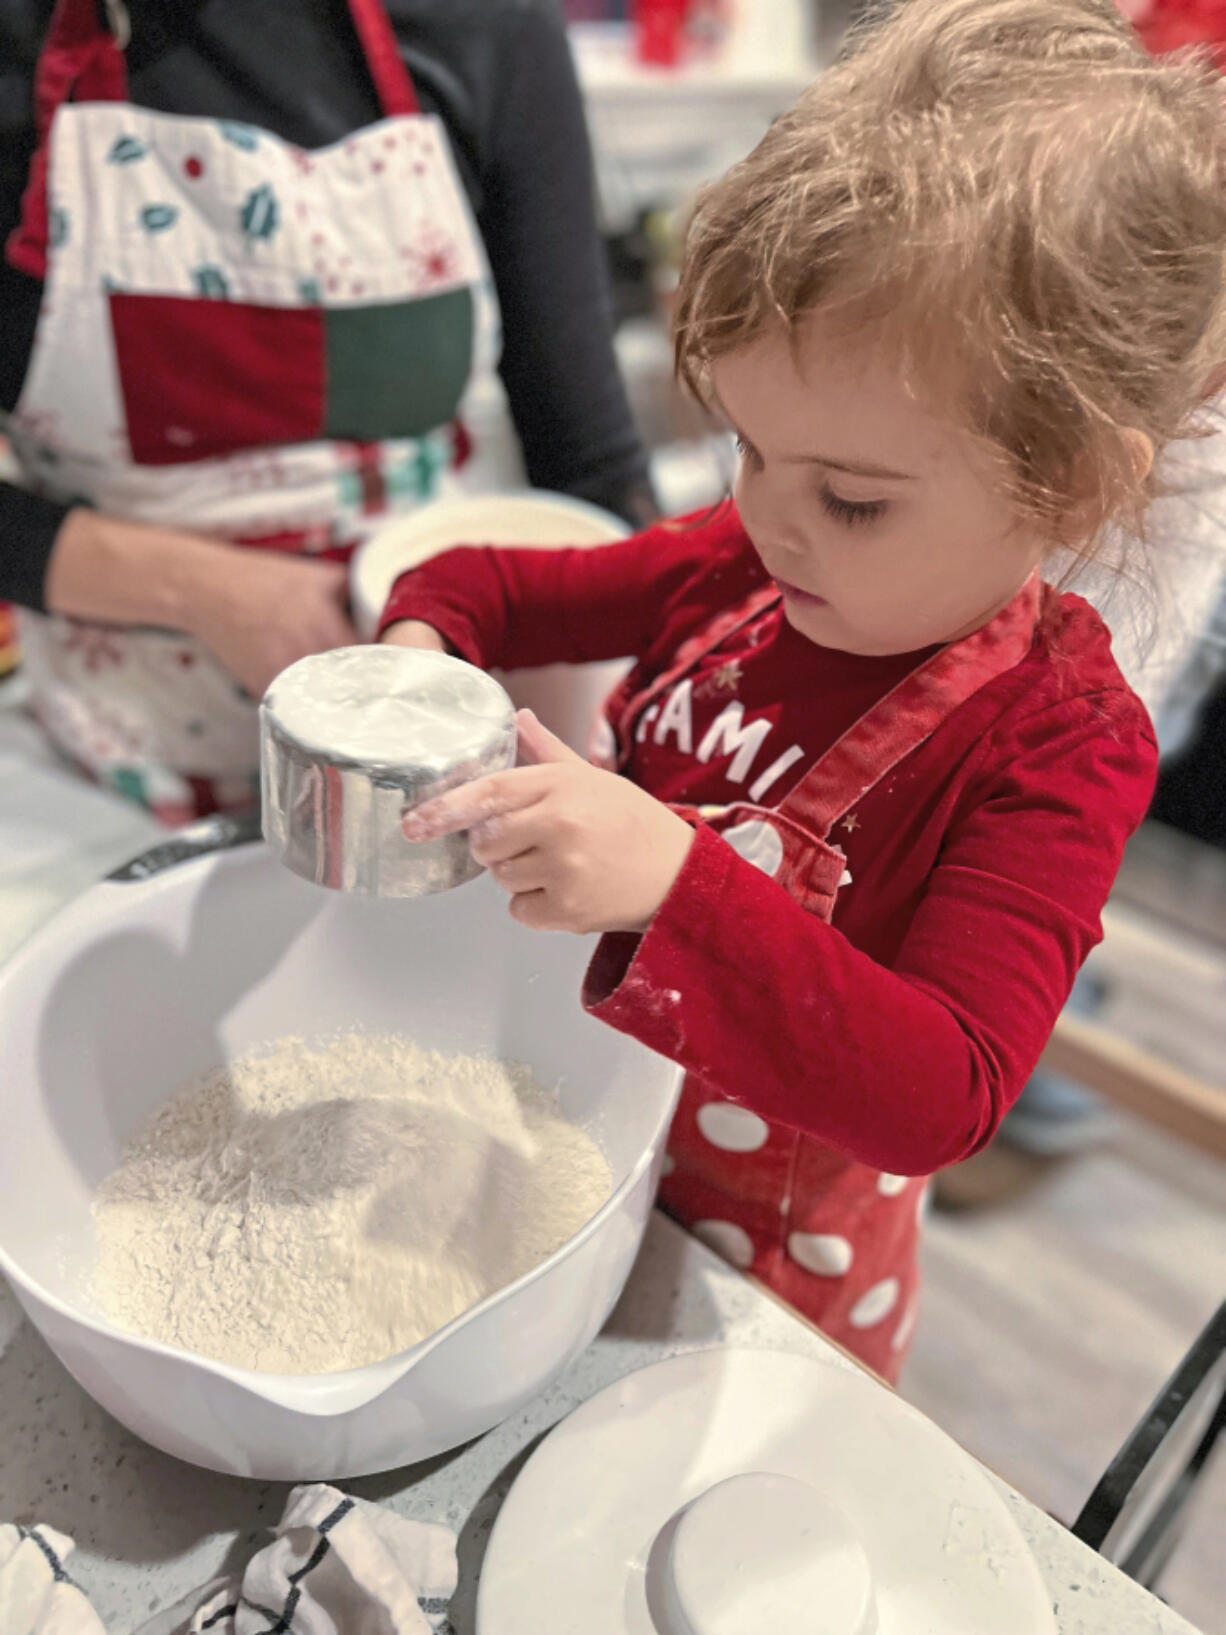 Lindsay Gardner and her 3-year-old daughter,  Ellie, measure flour into a mixing bowl for cookies.